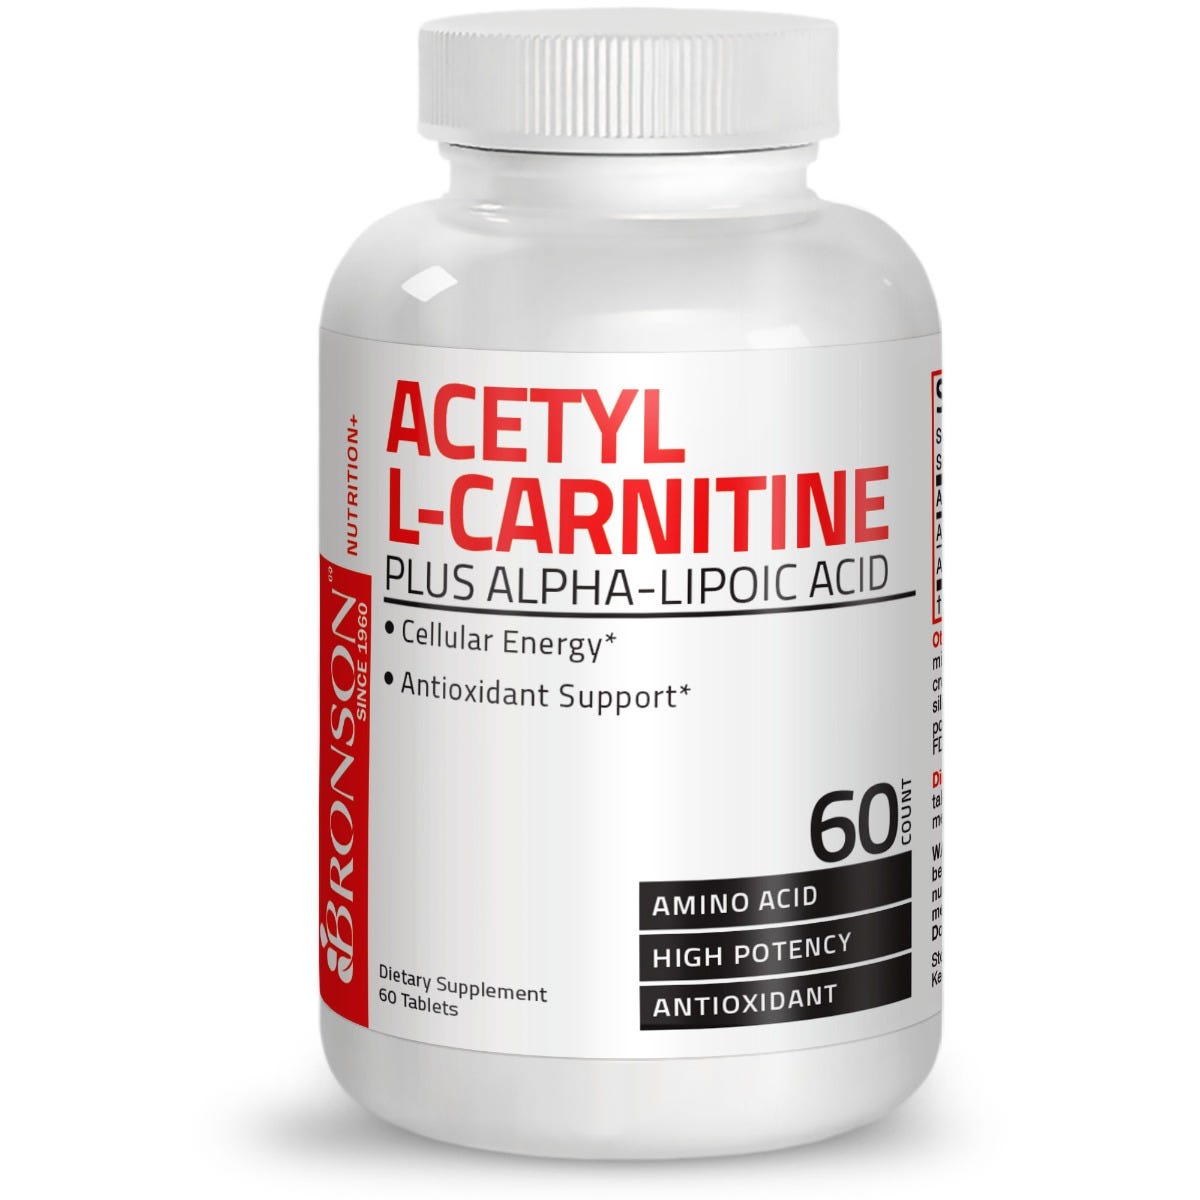 Acetyl L-Carnitine with Alpha-Lipoic Acid view 1 of 6